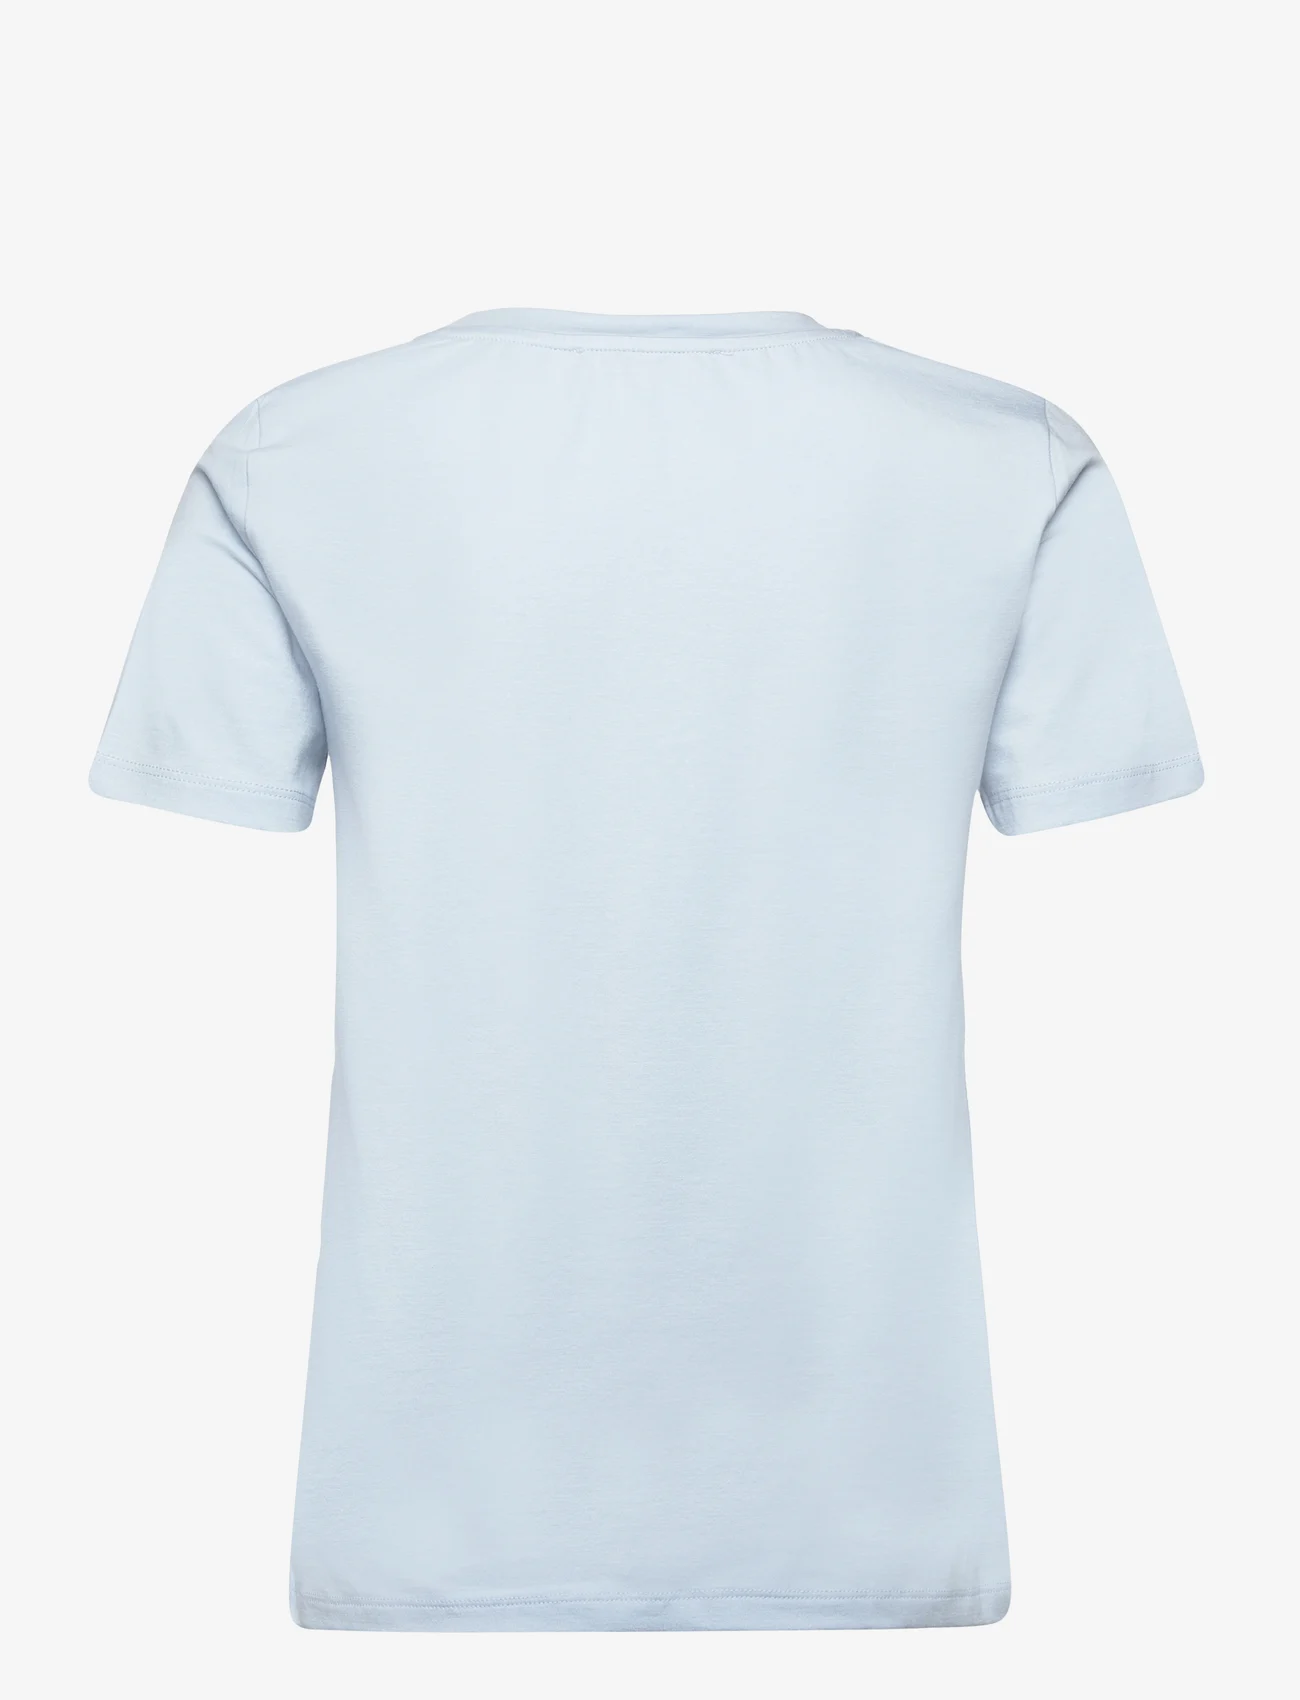 A-View - Stabil top s/s - t-shirts - light blue - 1